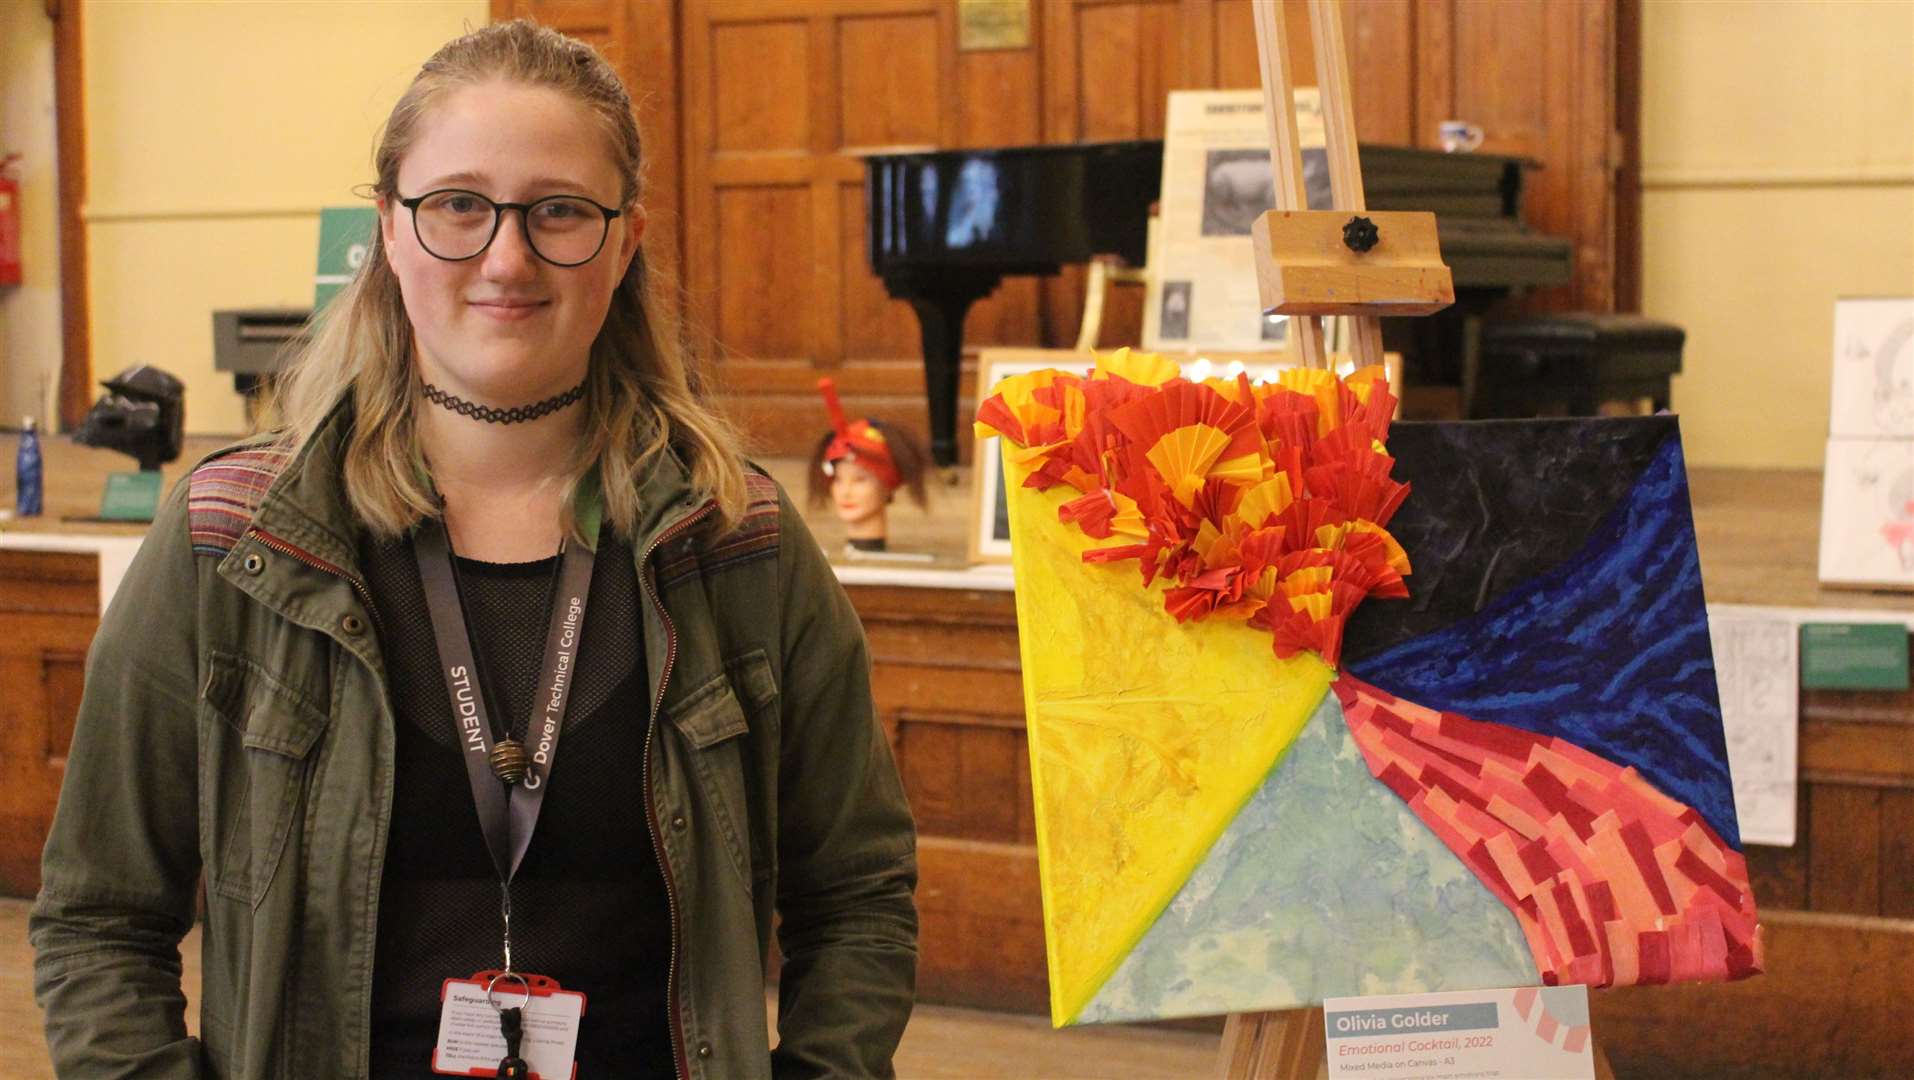 Art & Design Student Olivia Golder: "The lecturers are very knowledgeable, really understanding and just generally helpful."